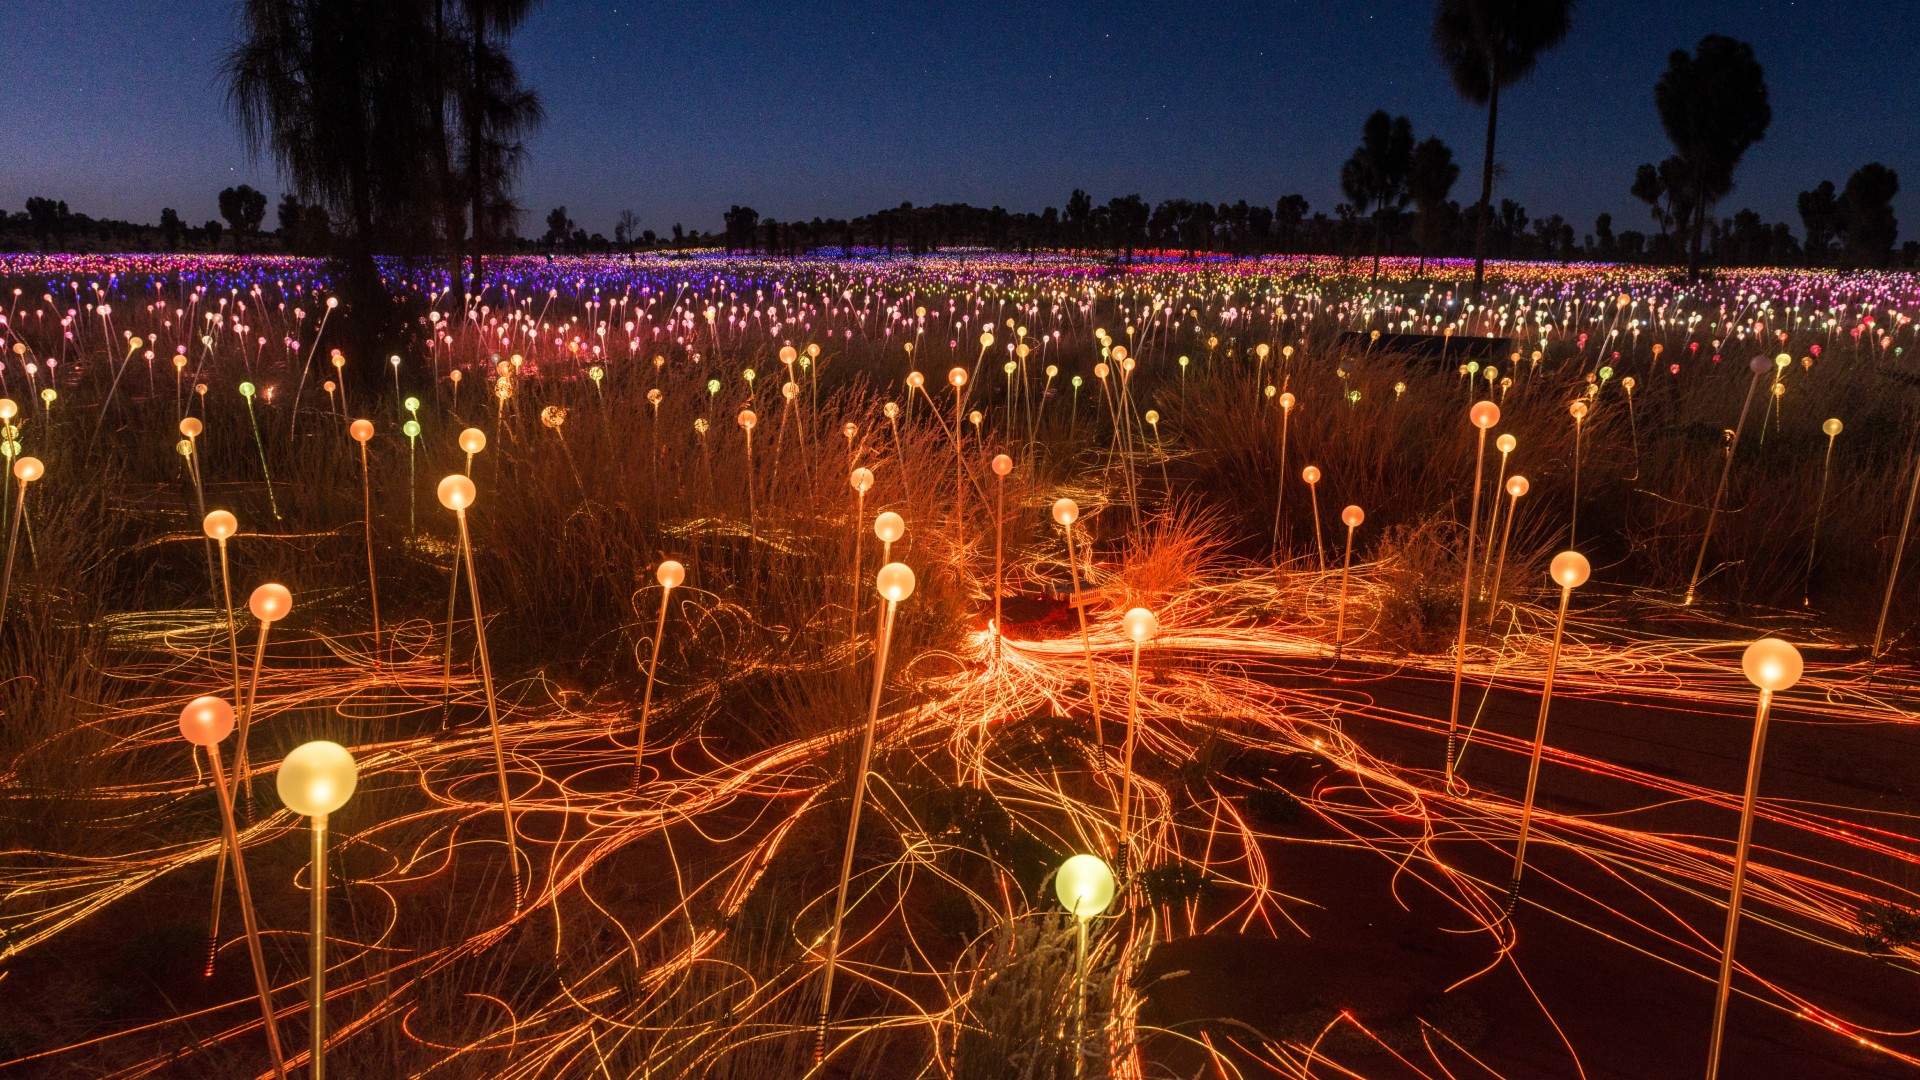 Artist Bruce Munro Is Bringing Two New Dazzling Light Installations to the NSW-Victorian Border